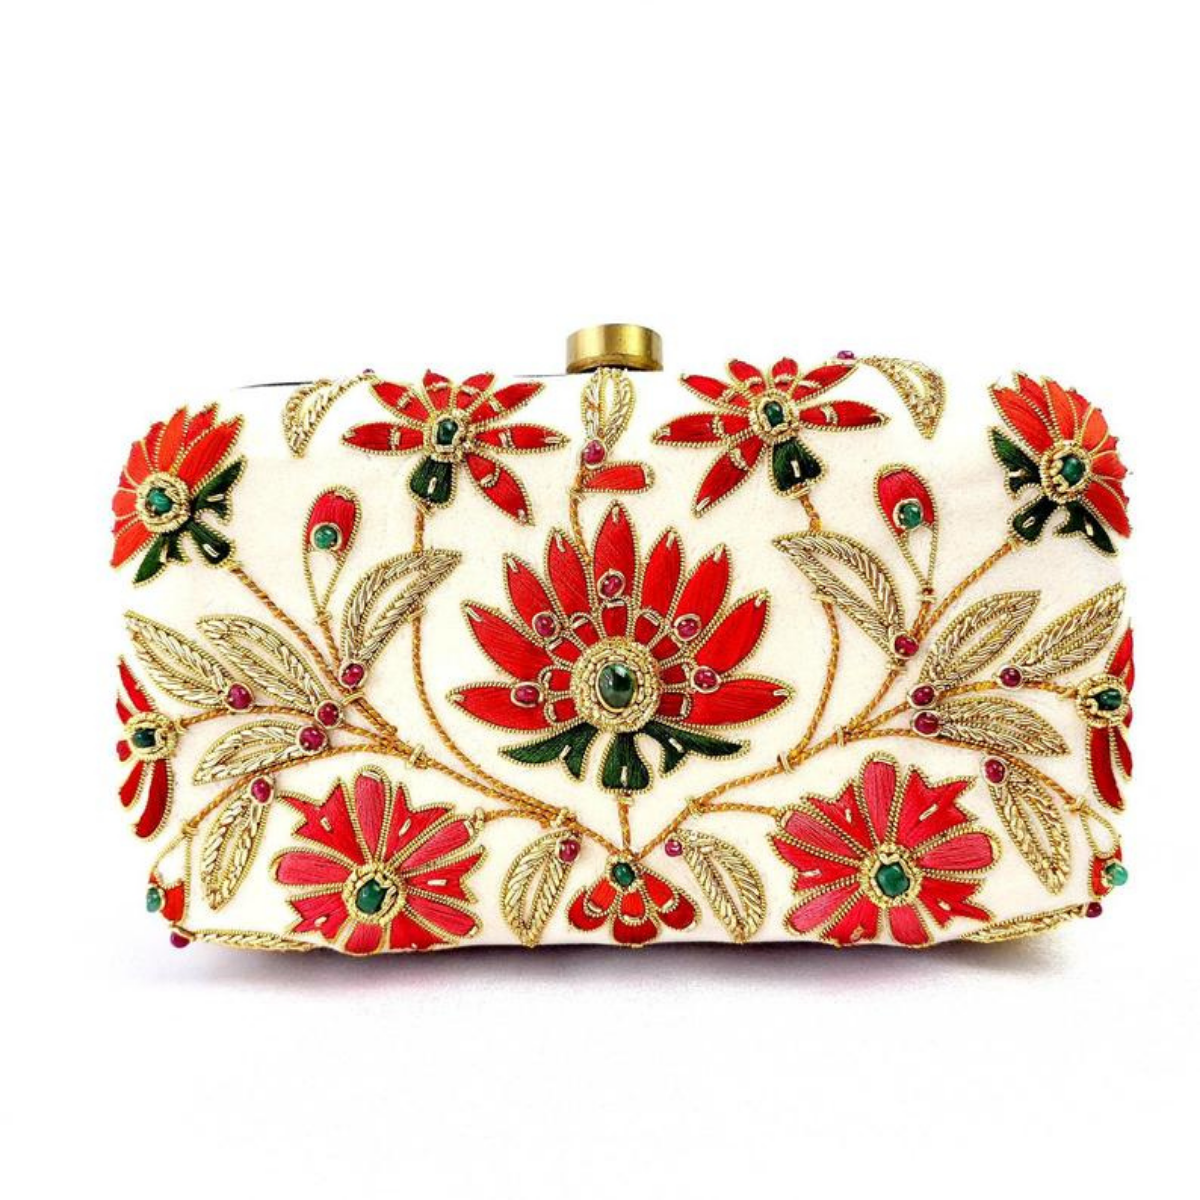 Ivory velvet evening clutch bag embroidered with red silk lotus flower and embellished with emeralds, zardozi clutch.